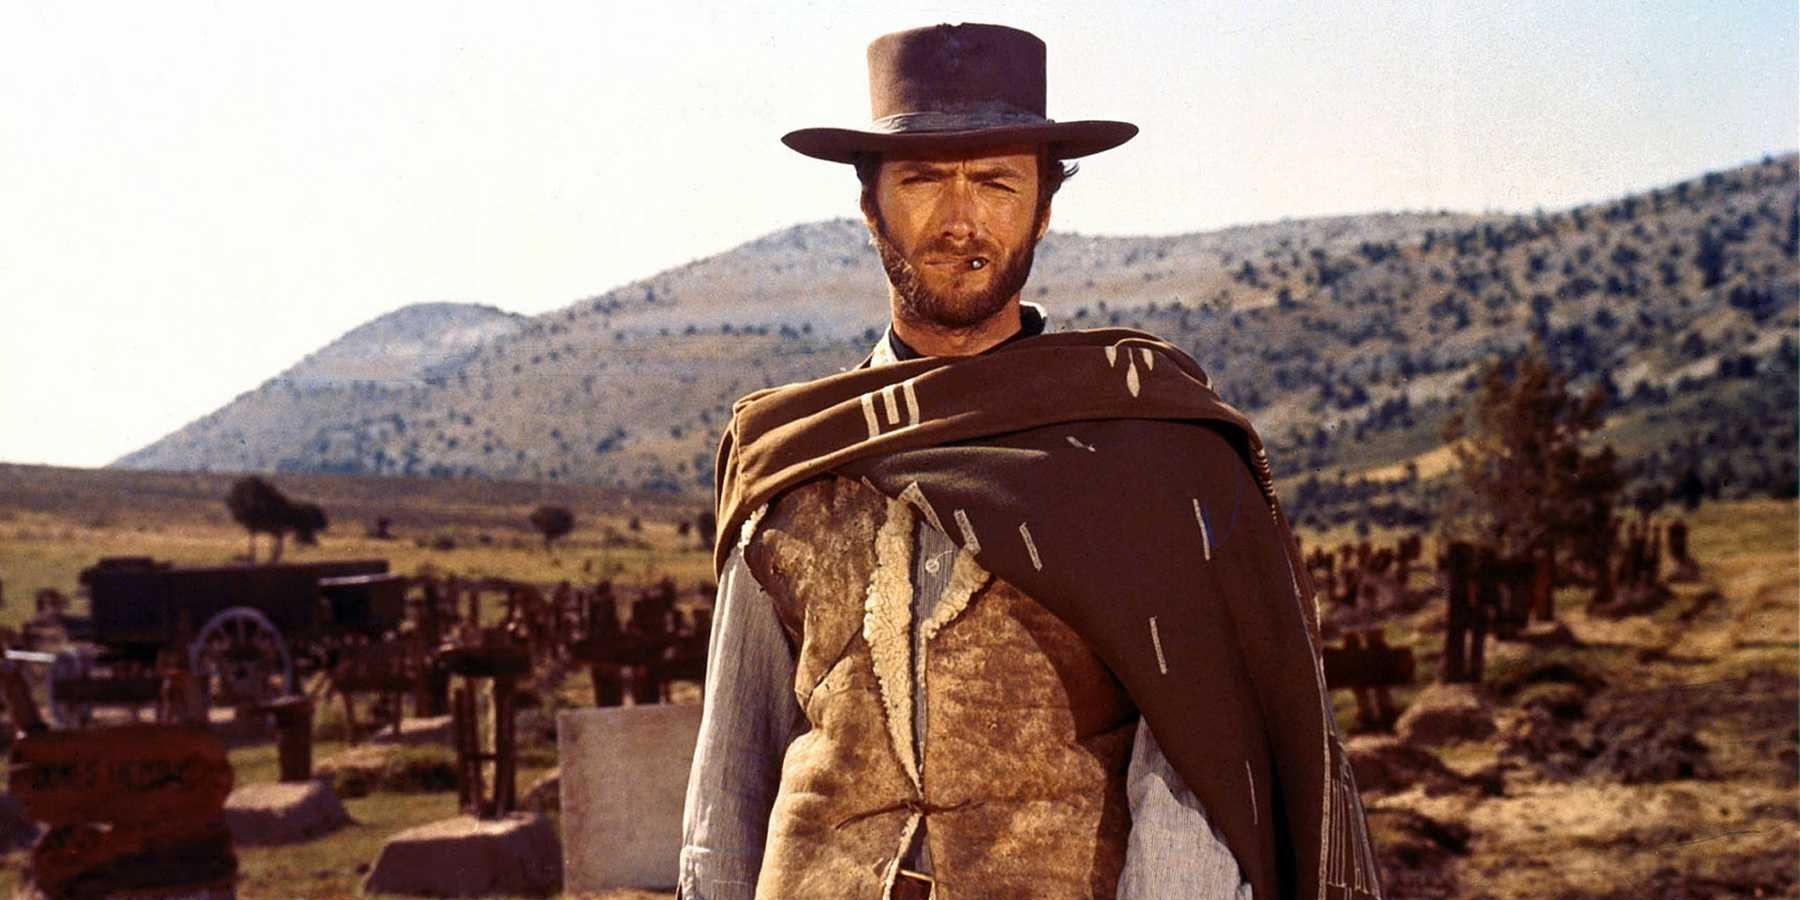 Clint Eastwood in The Good, the Bad, and the Ugly